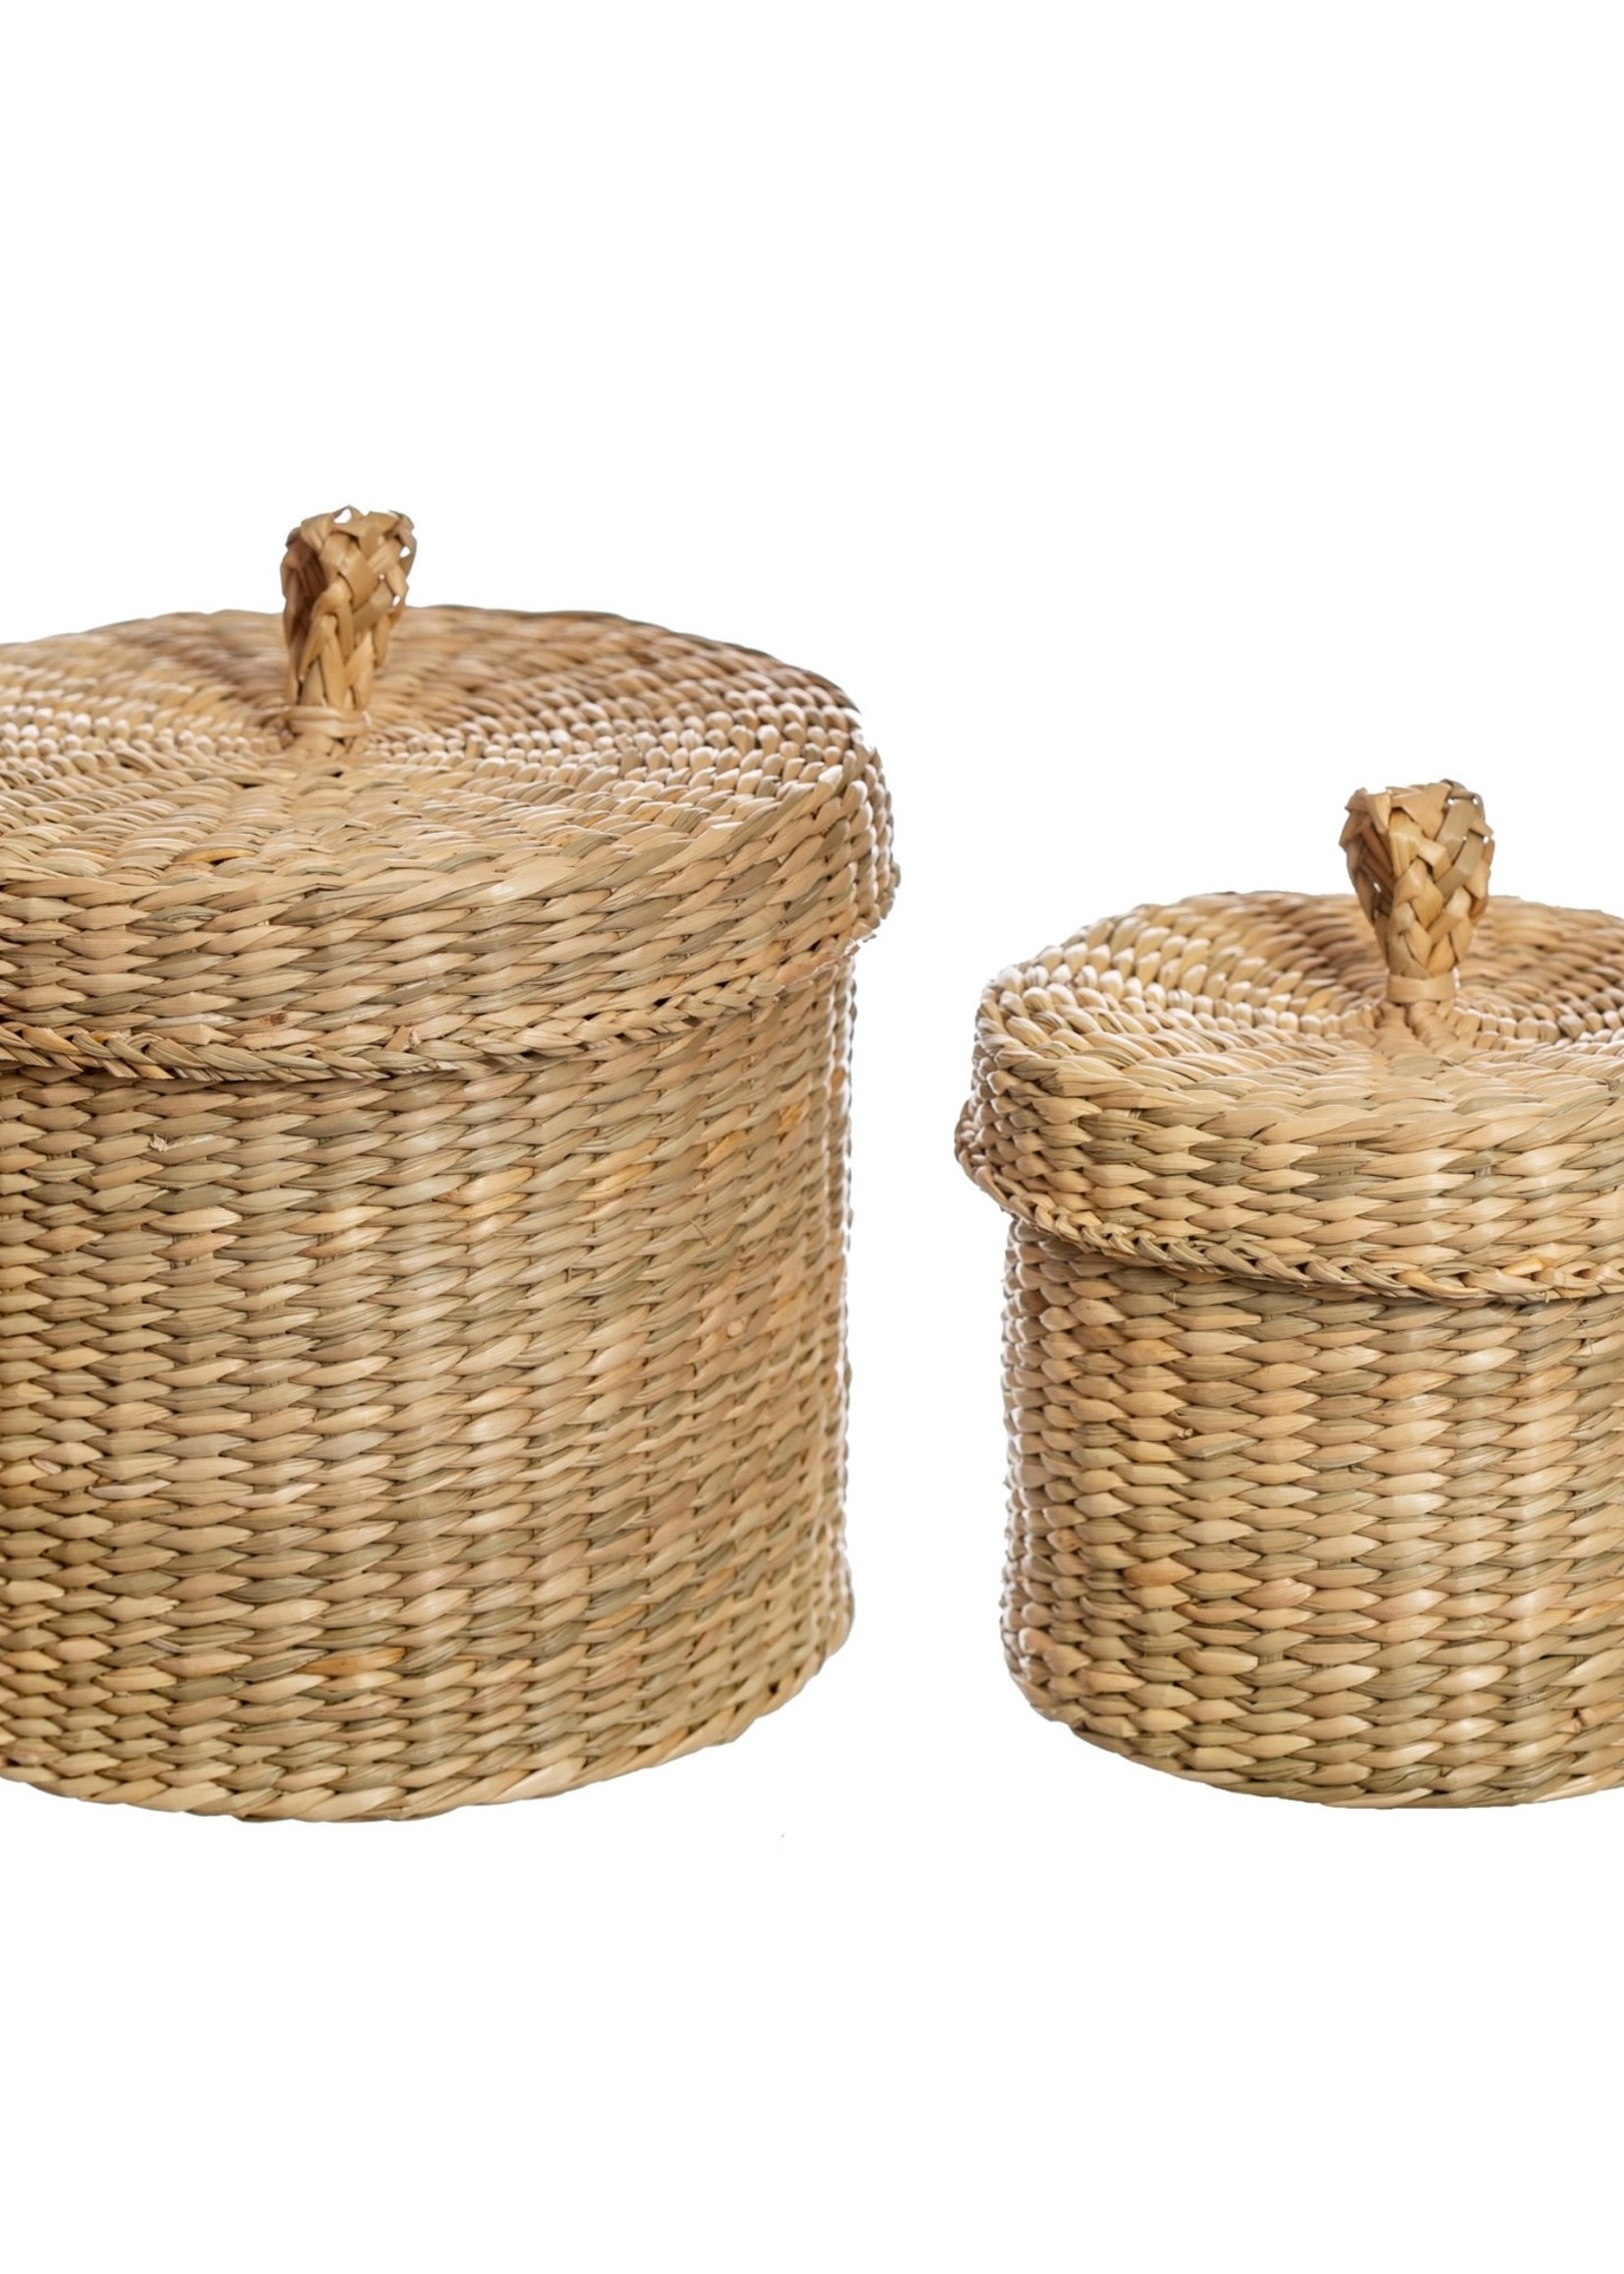 Sass & Belle Seagrass Baskets With Lid - Set of 2